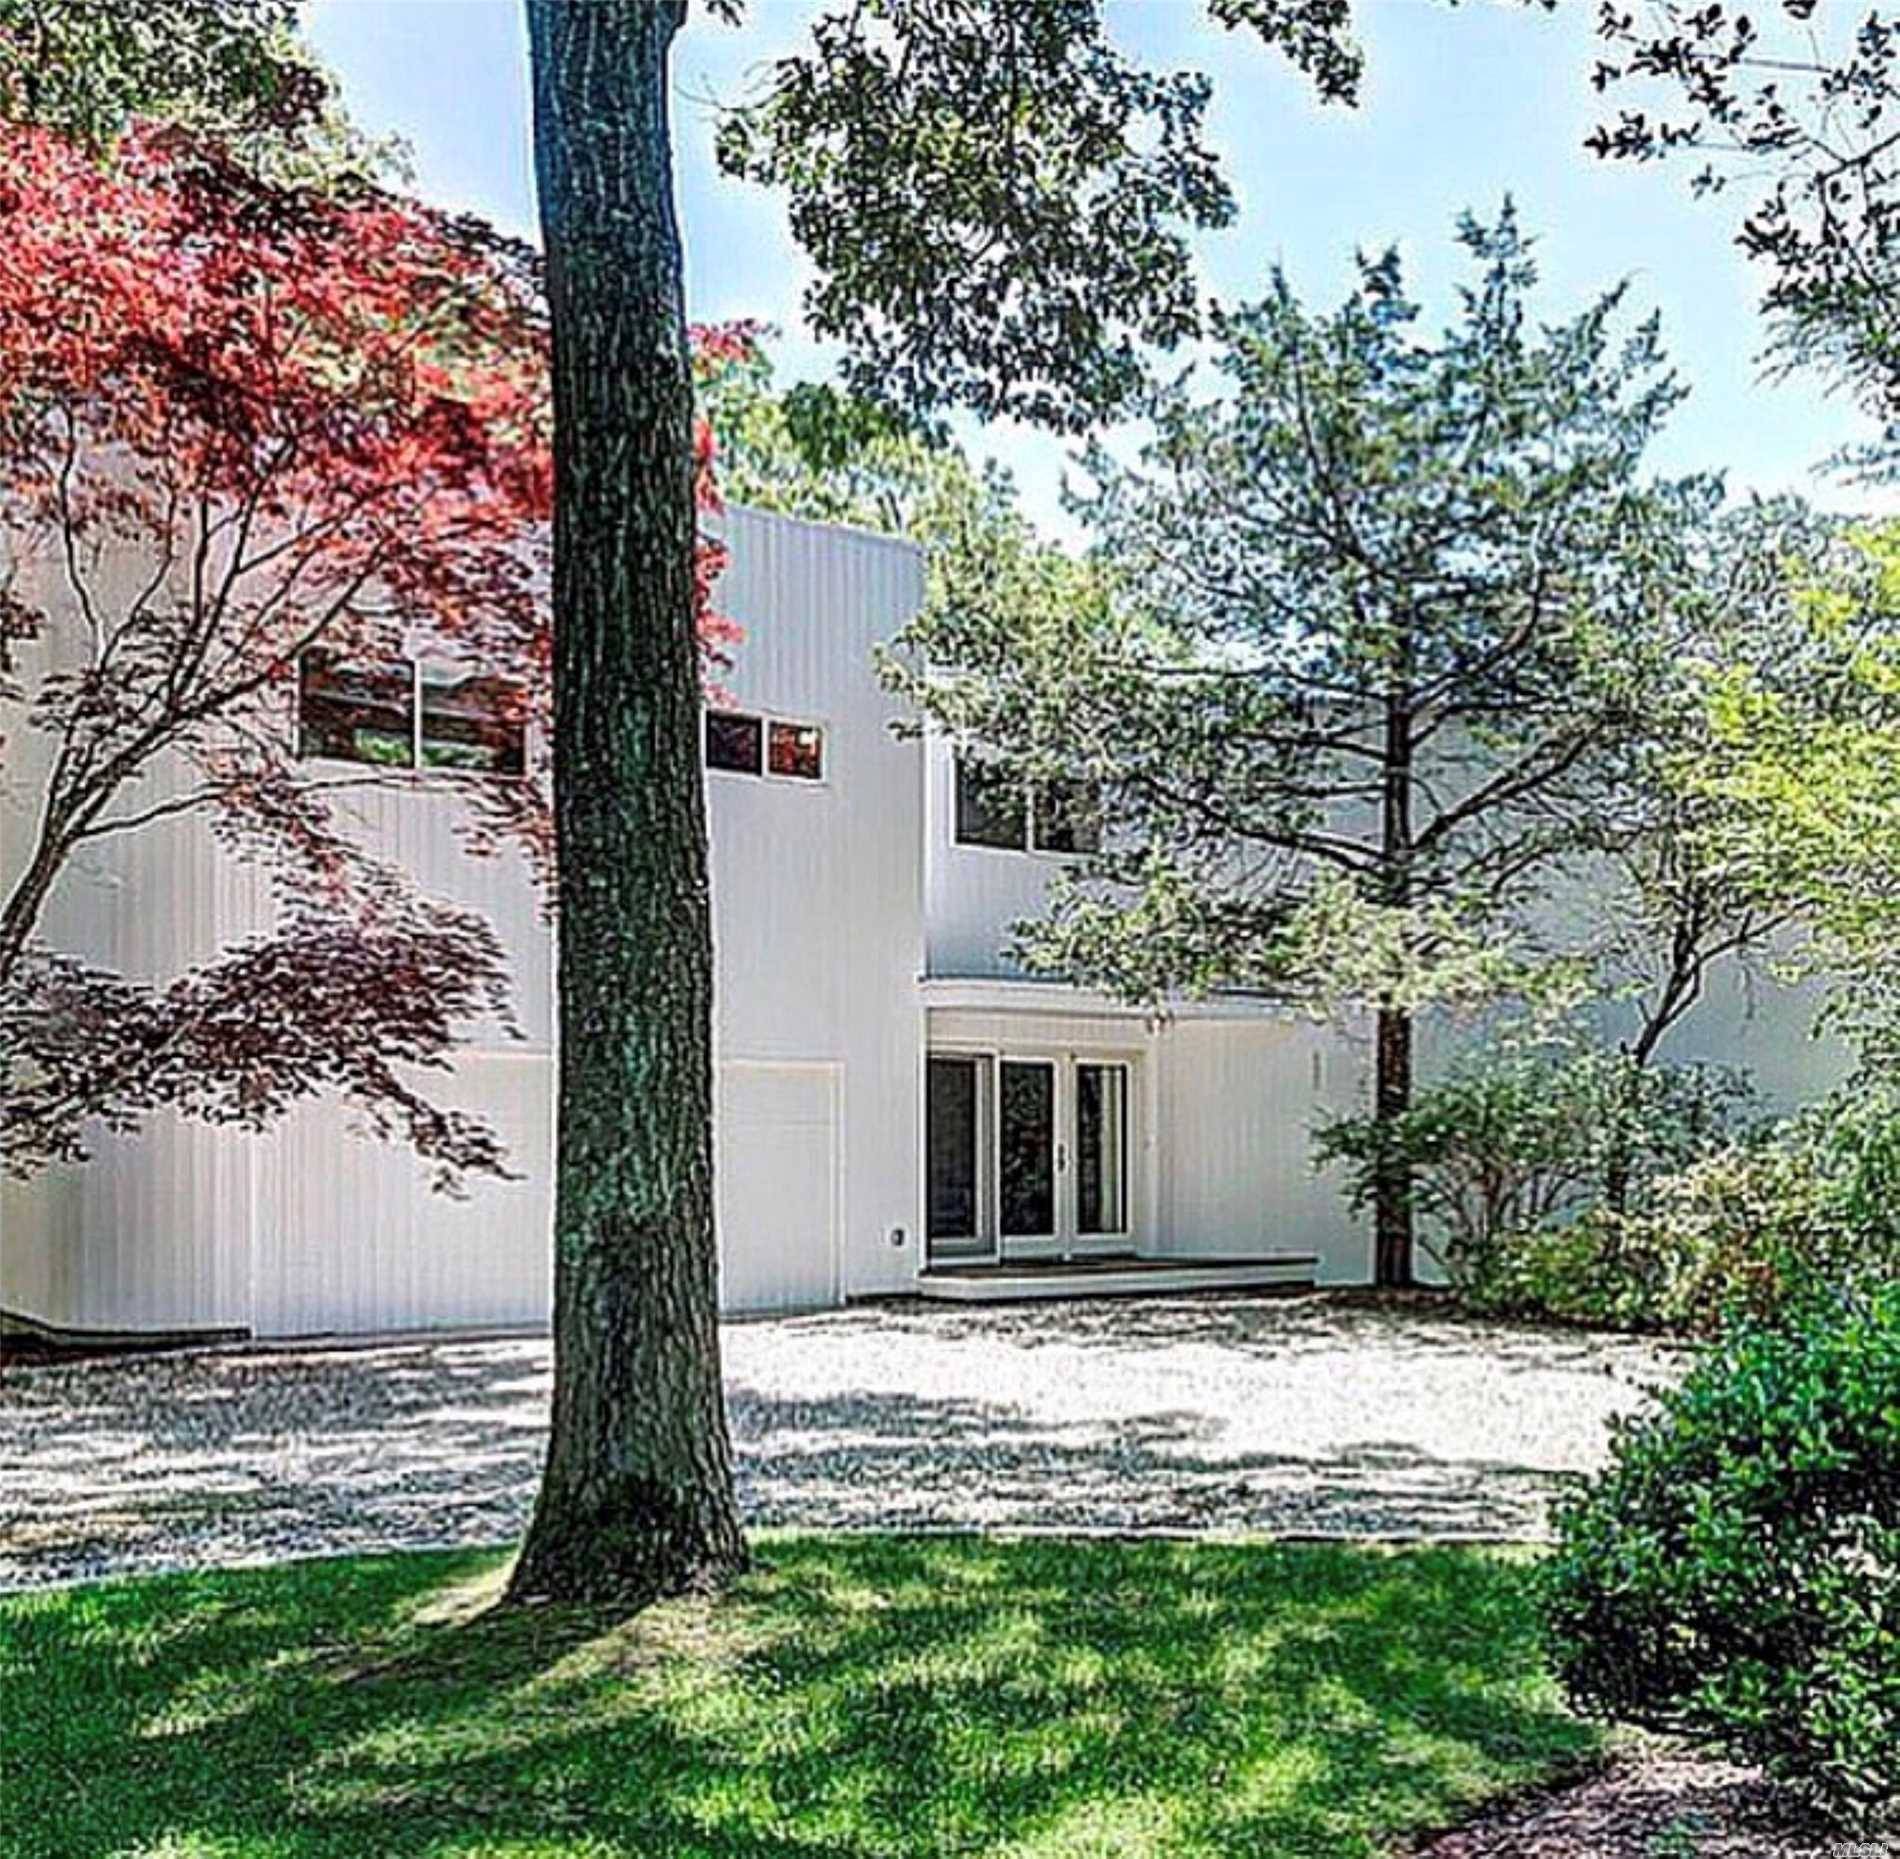 La Maison Blanche Is A 6 Bedroom Home In The Quiet Village Of Quogue!!